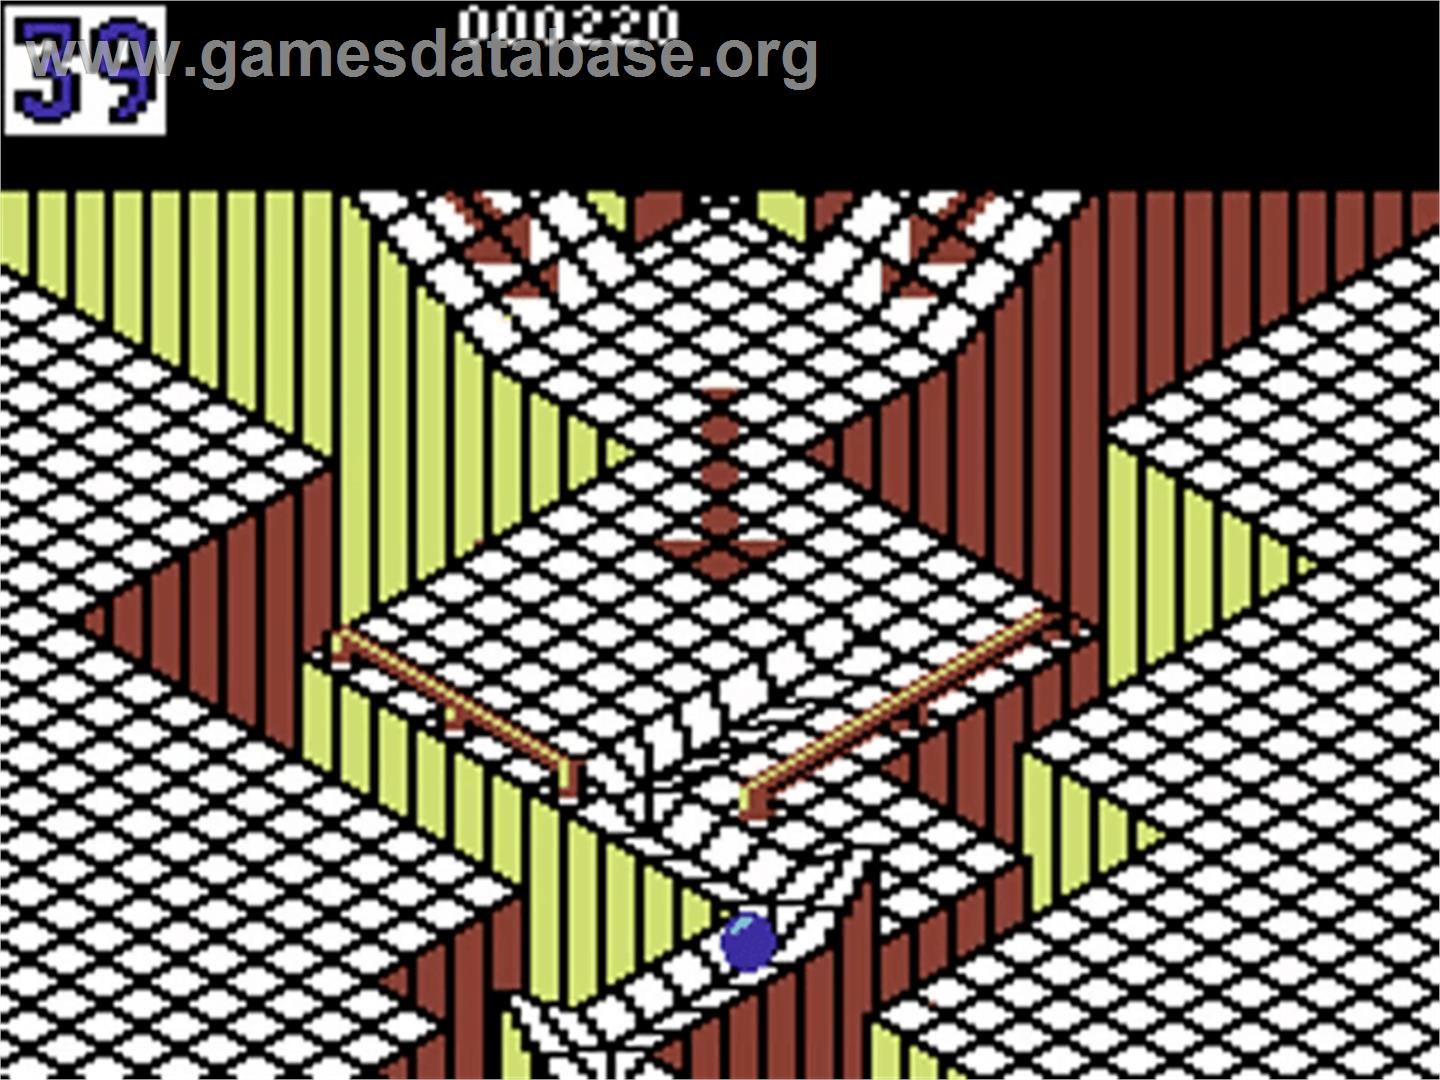 Marble Madness - Commodore 64 - Artwork - In Game